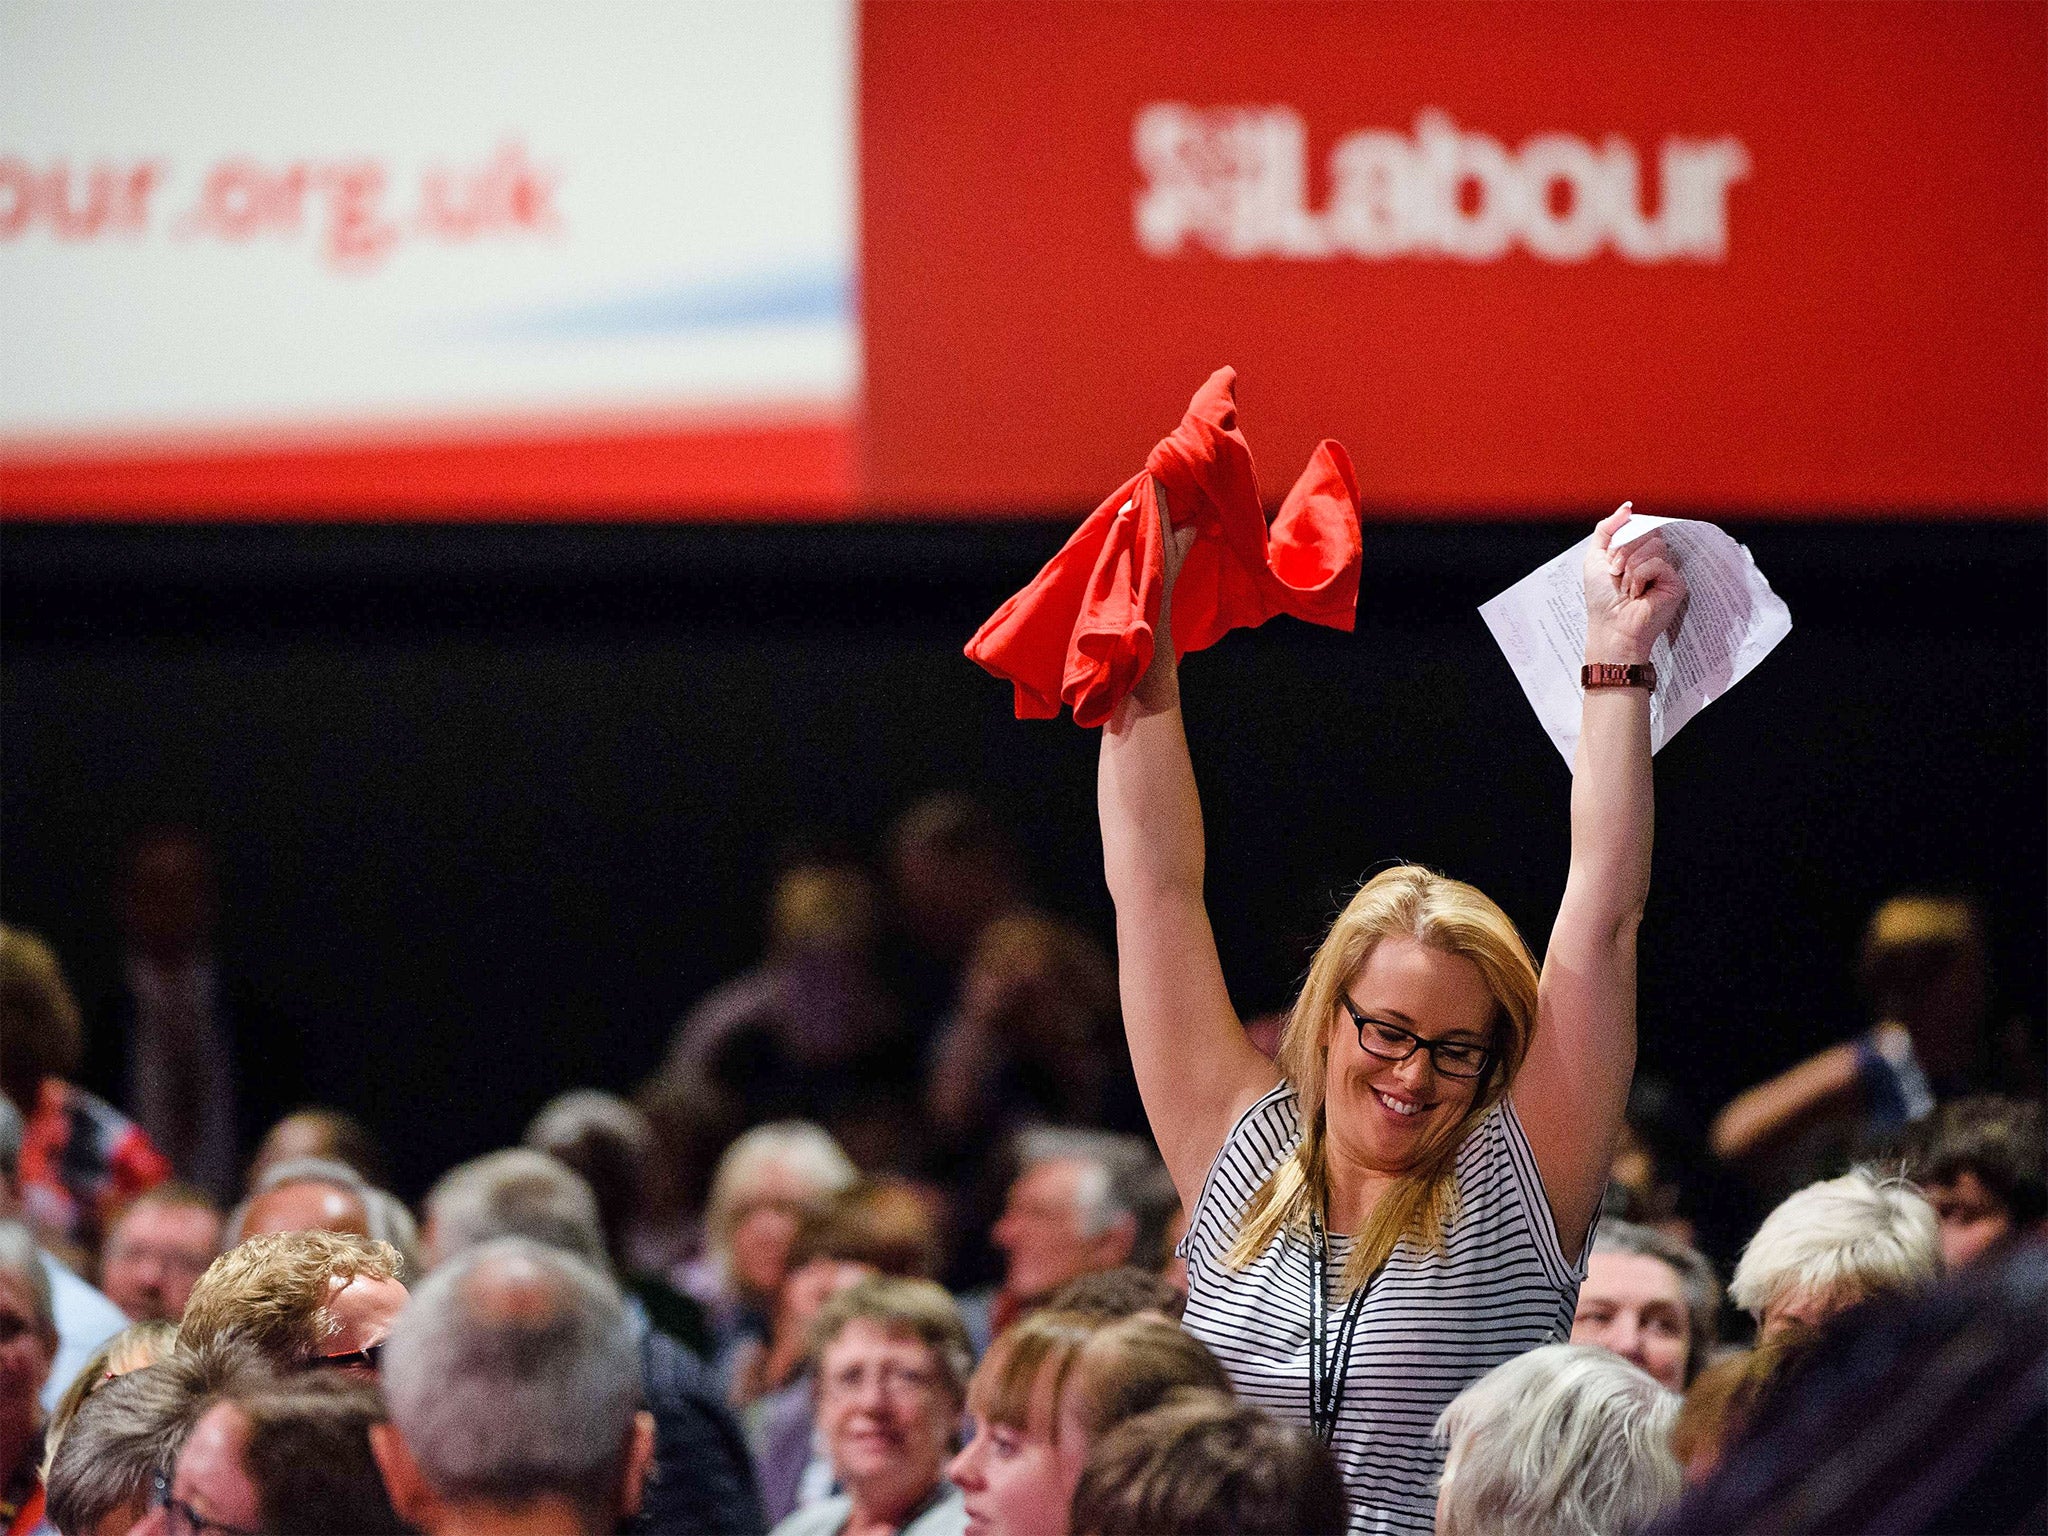 A Labour delegate celebrates after being chosen to address the audience (Getty)